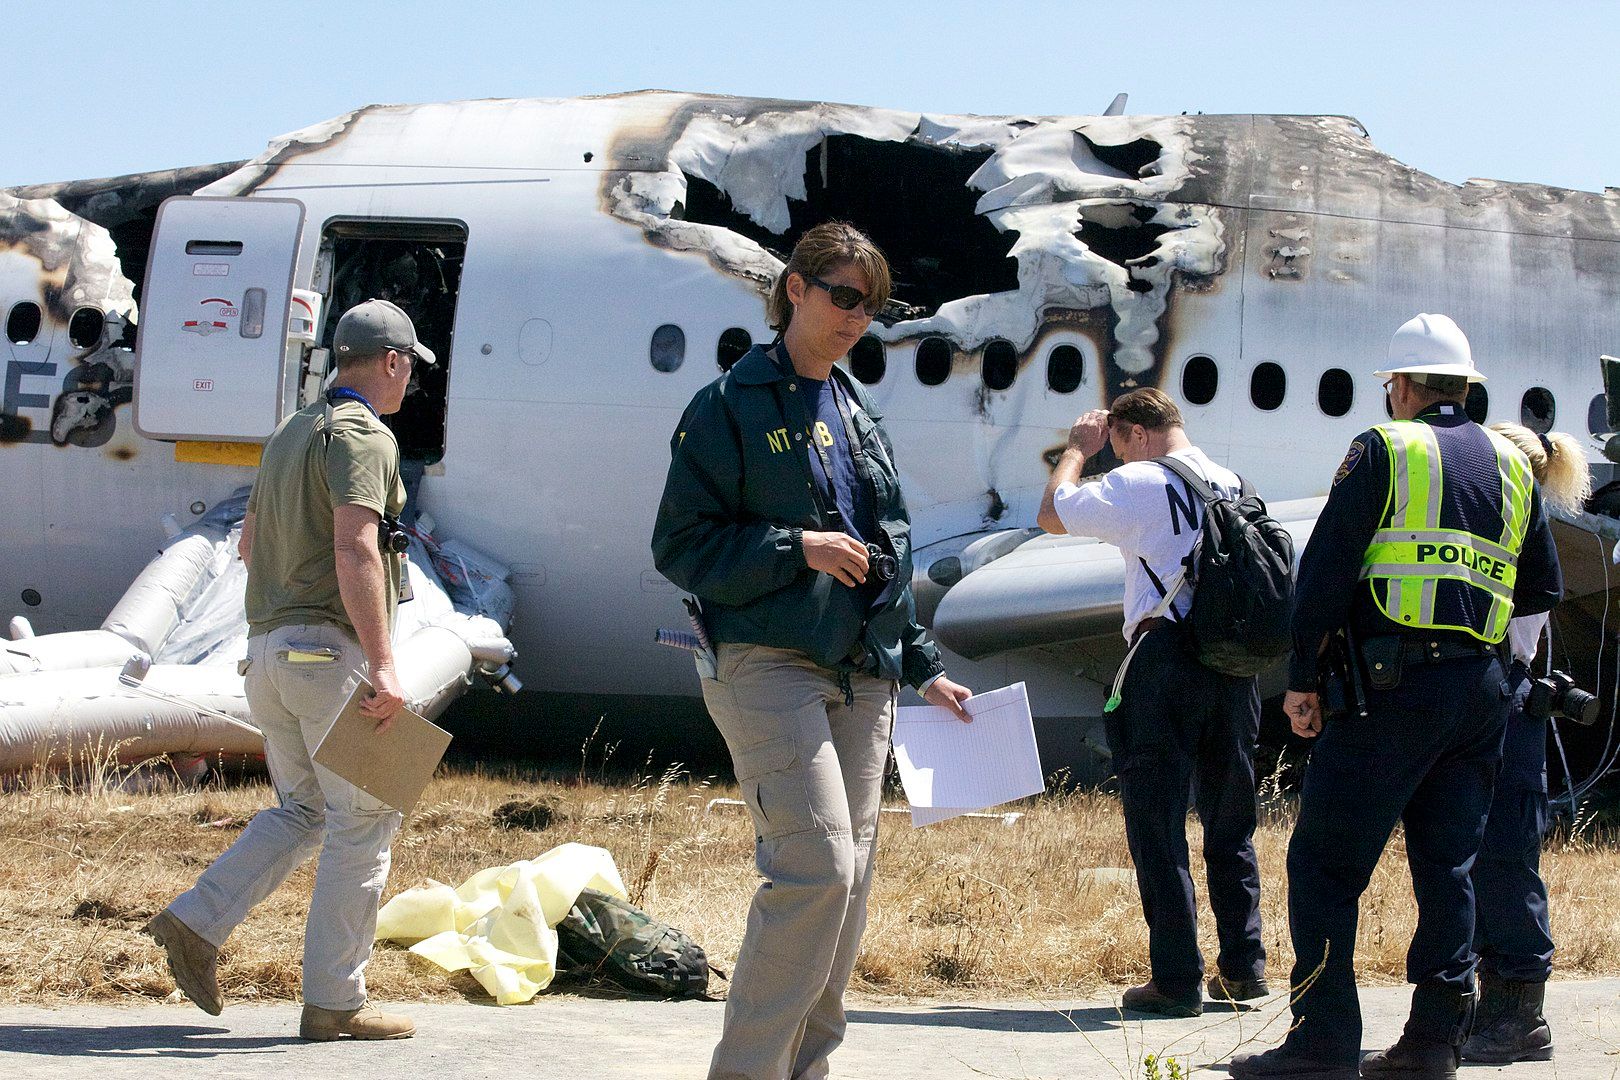 NTSB Investigators at the scene of the Asiana Airlines Flight 214 incident.